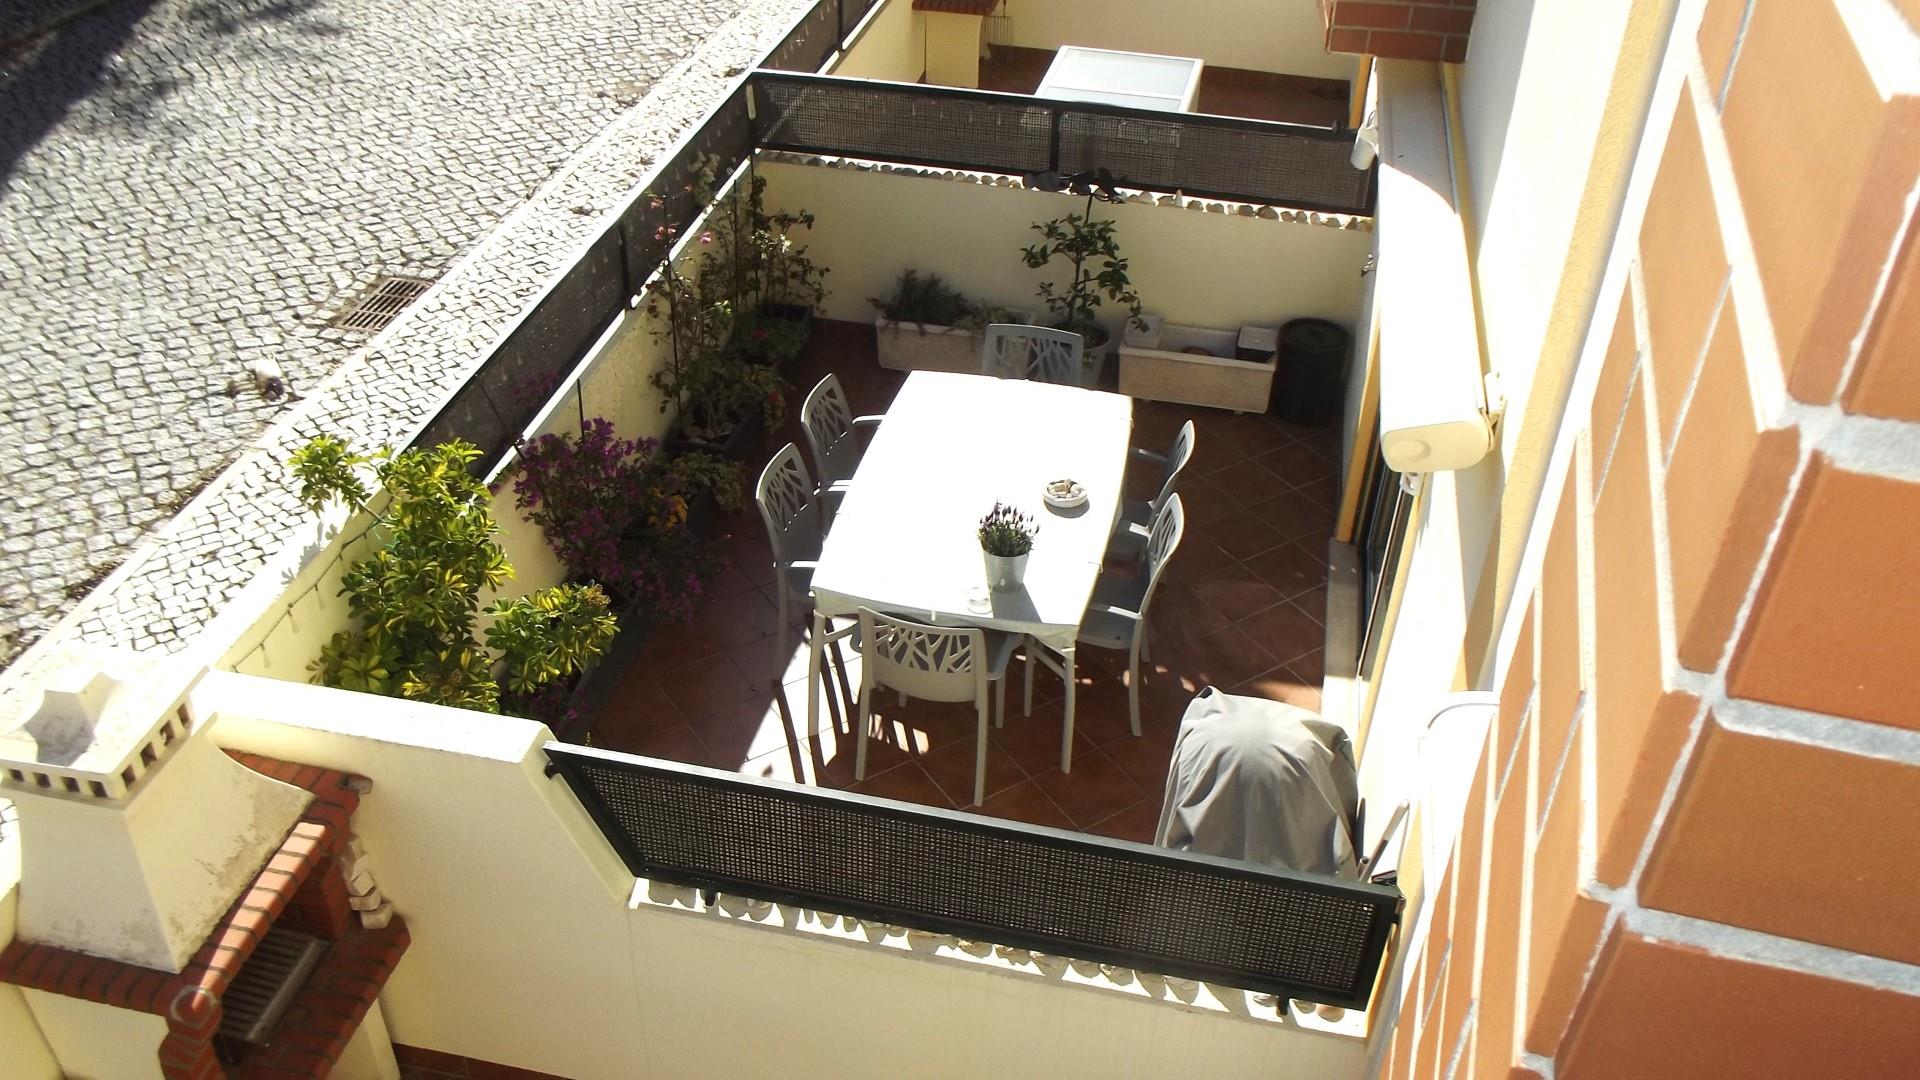 3 Bed Townhouse With Garage And Access To Swimming Pool - Conceição / Tavira